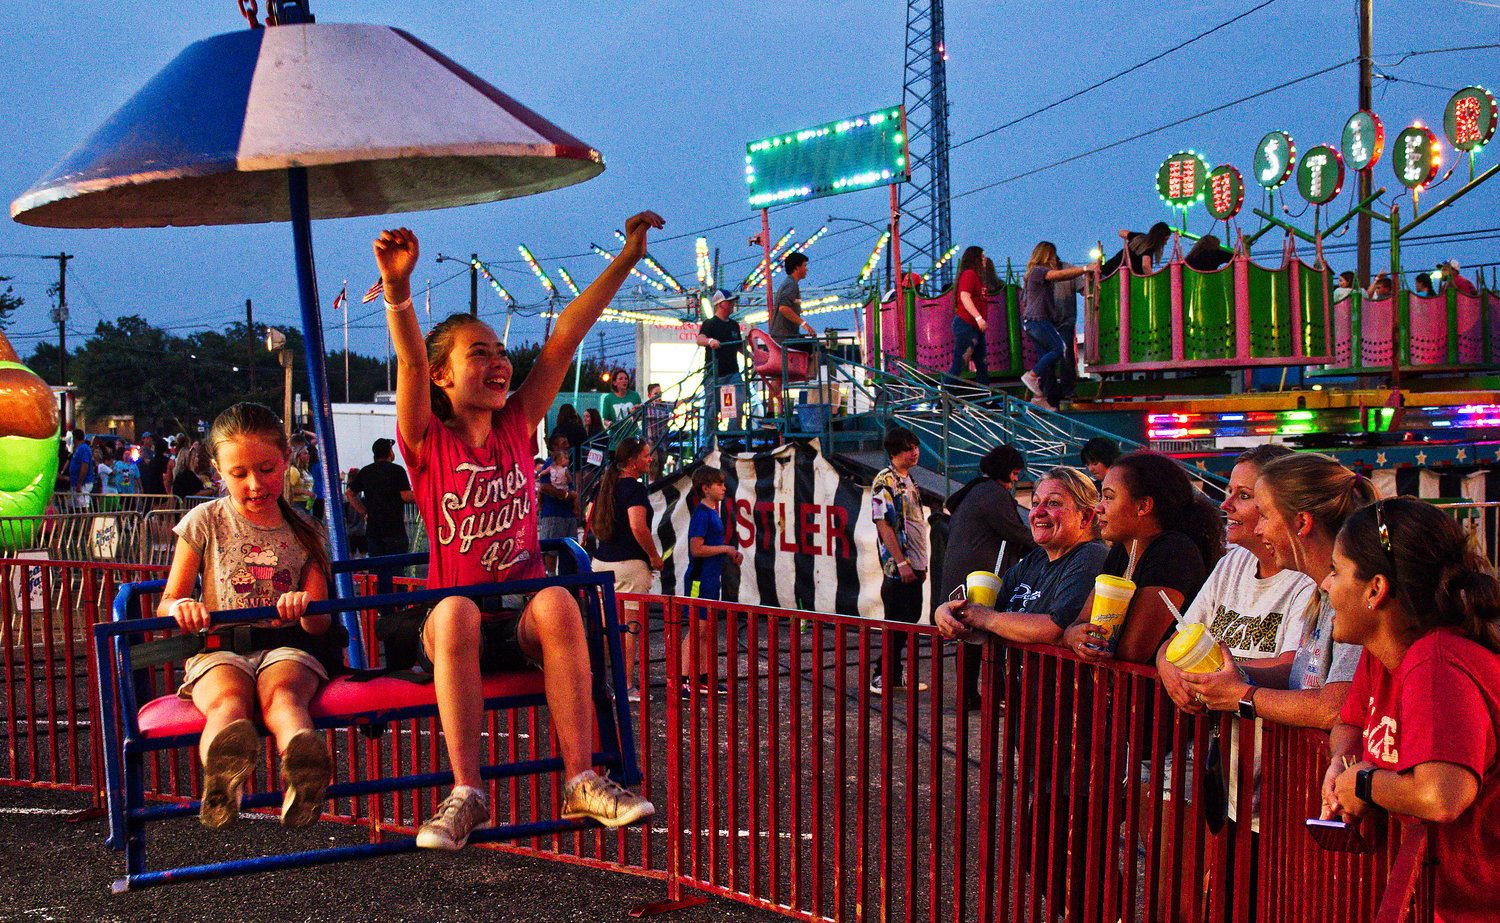 The carnival rides were popular among all ages.